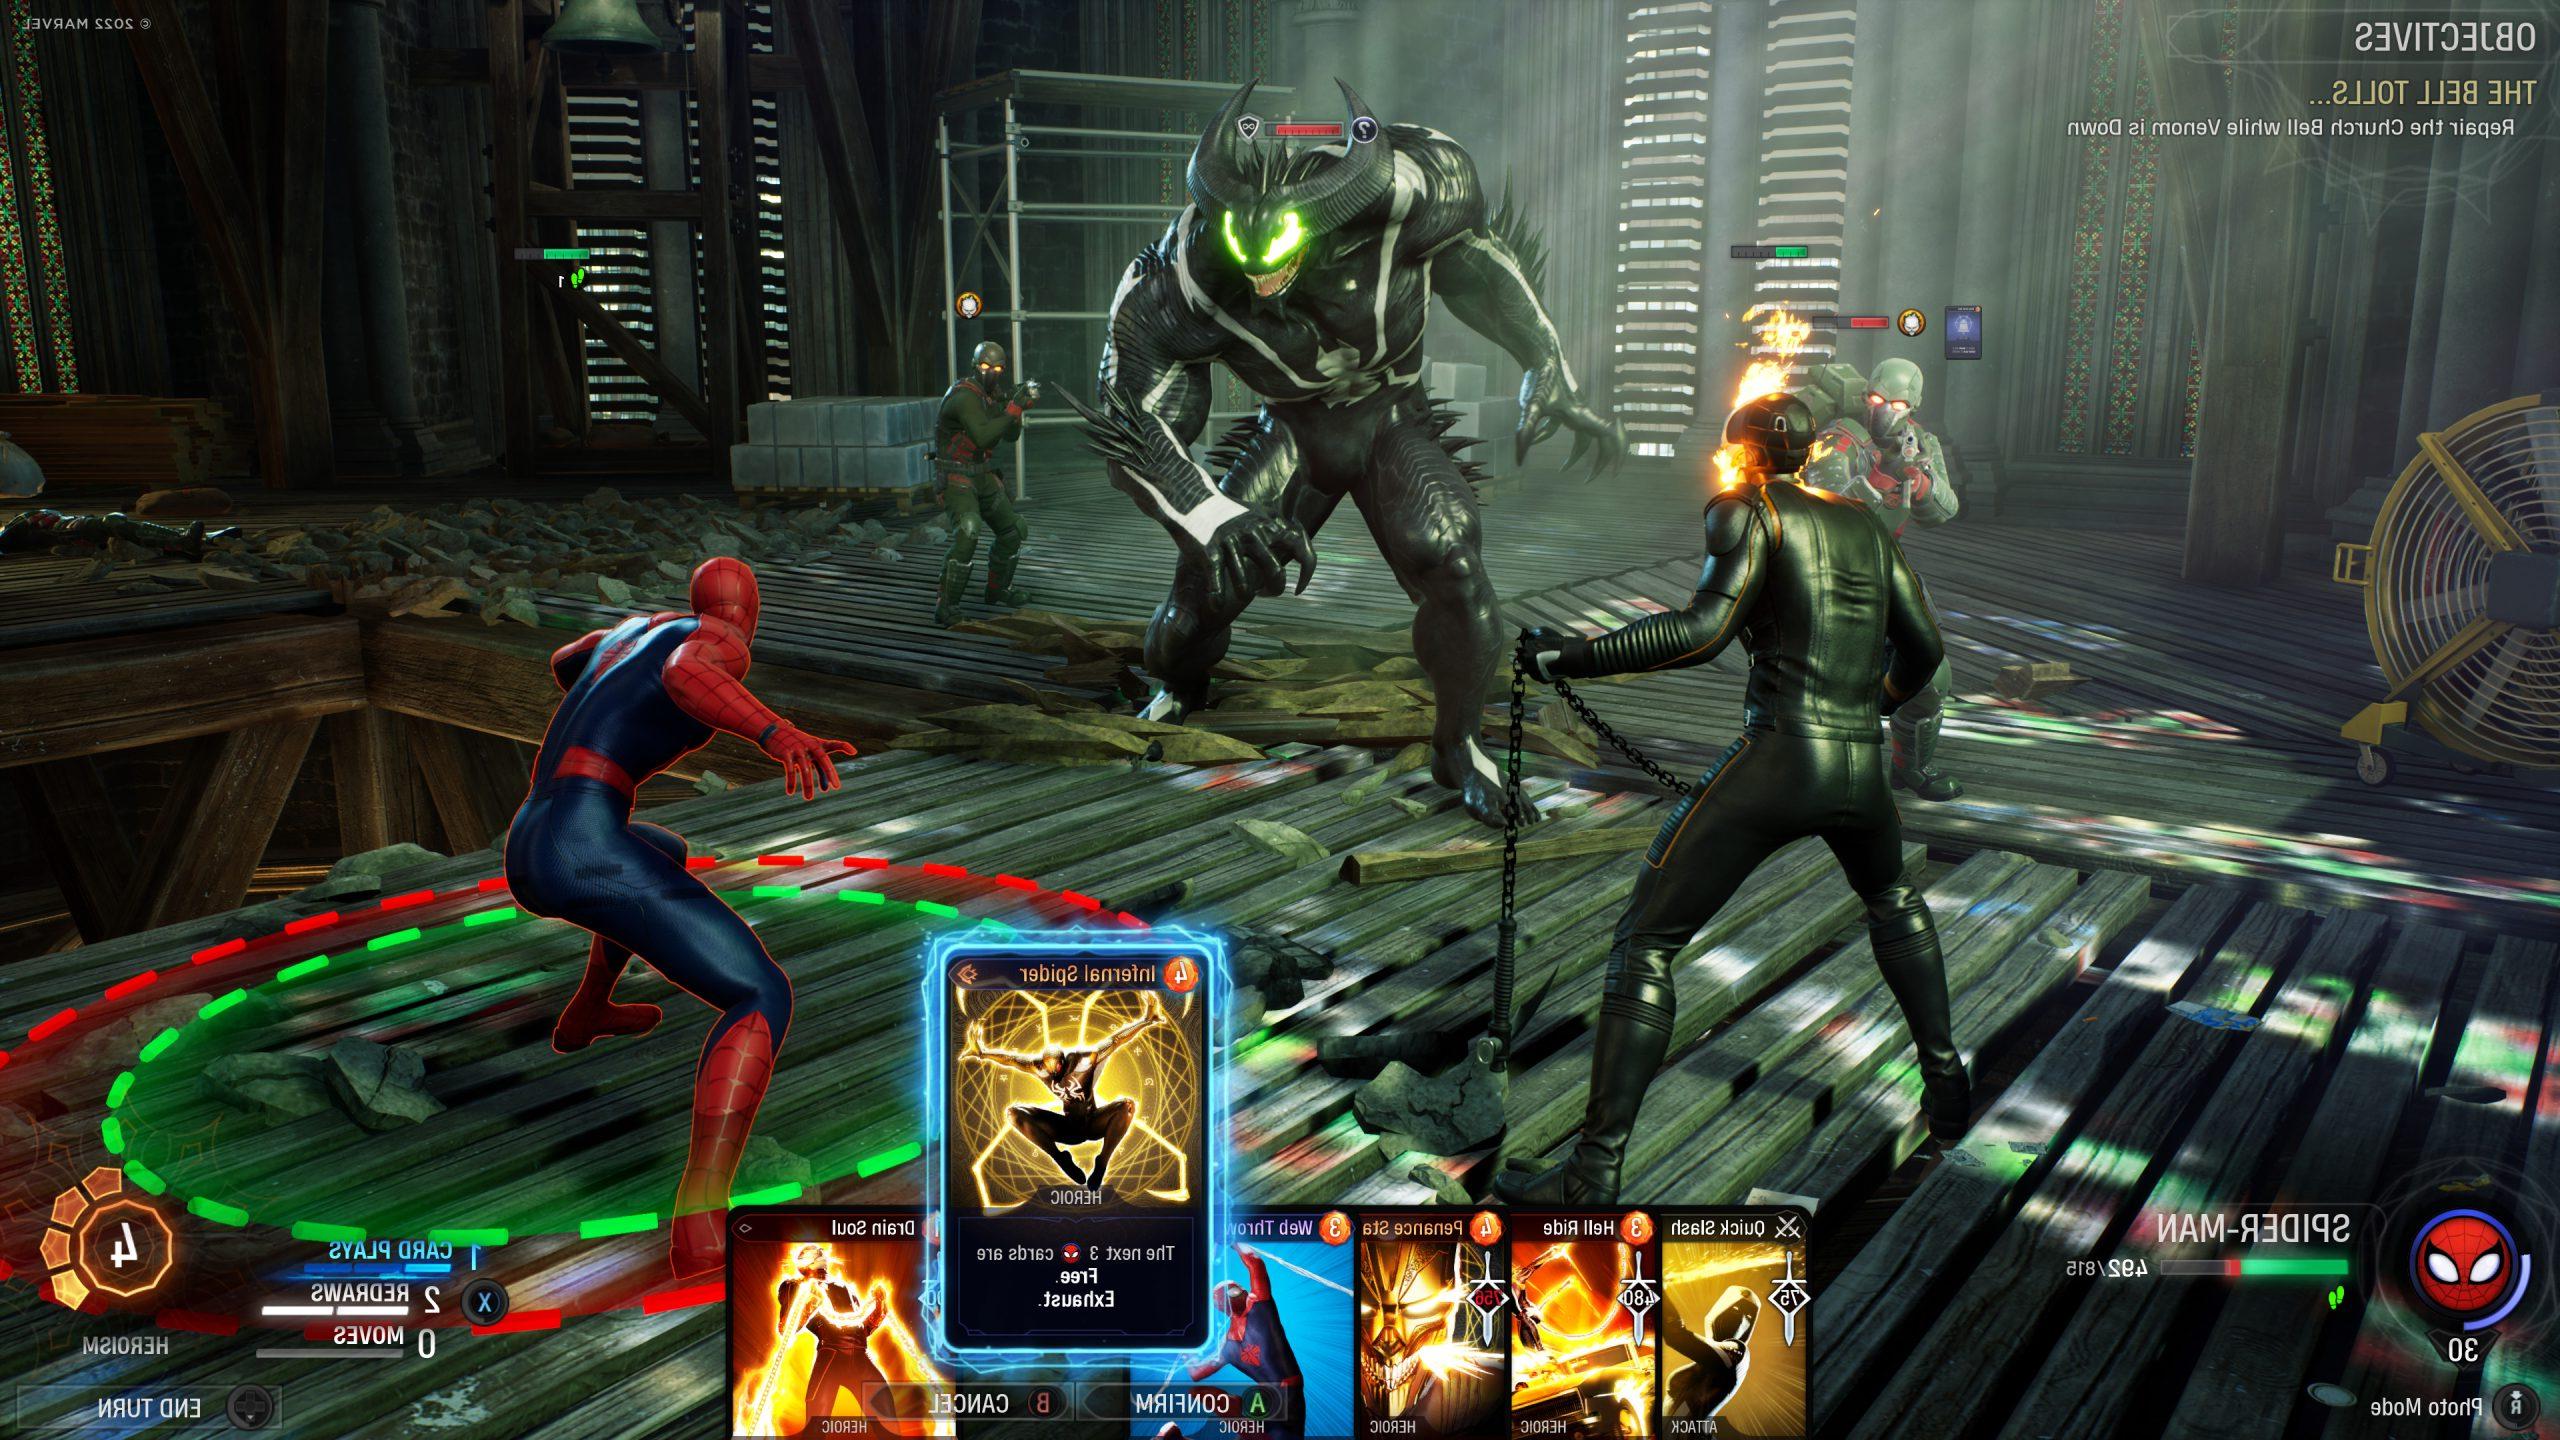 Marvel's Midnight Suns Gets a New Release Date For PC, Xbox, and PlayStation